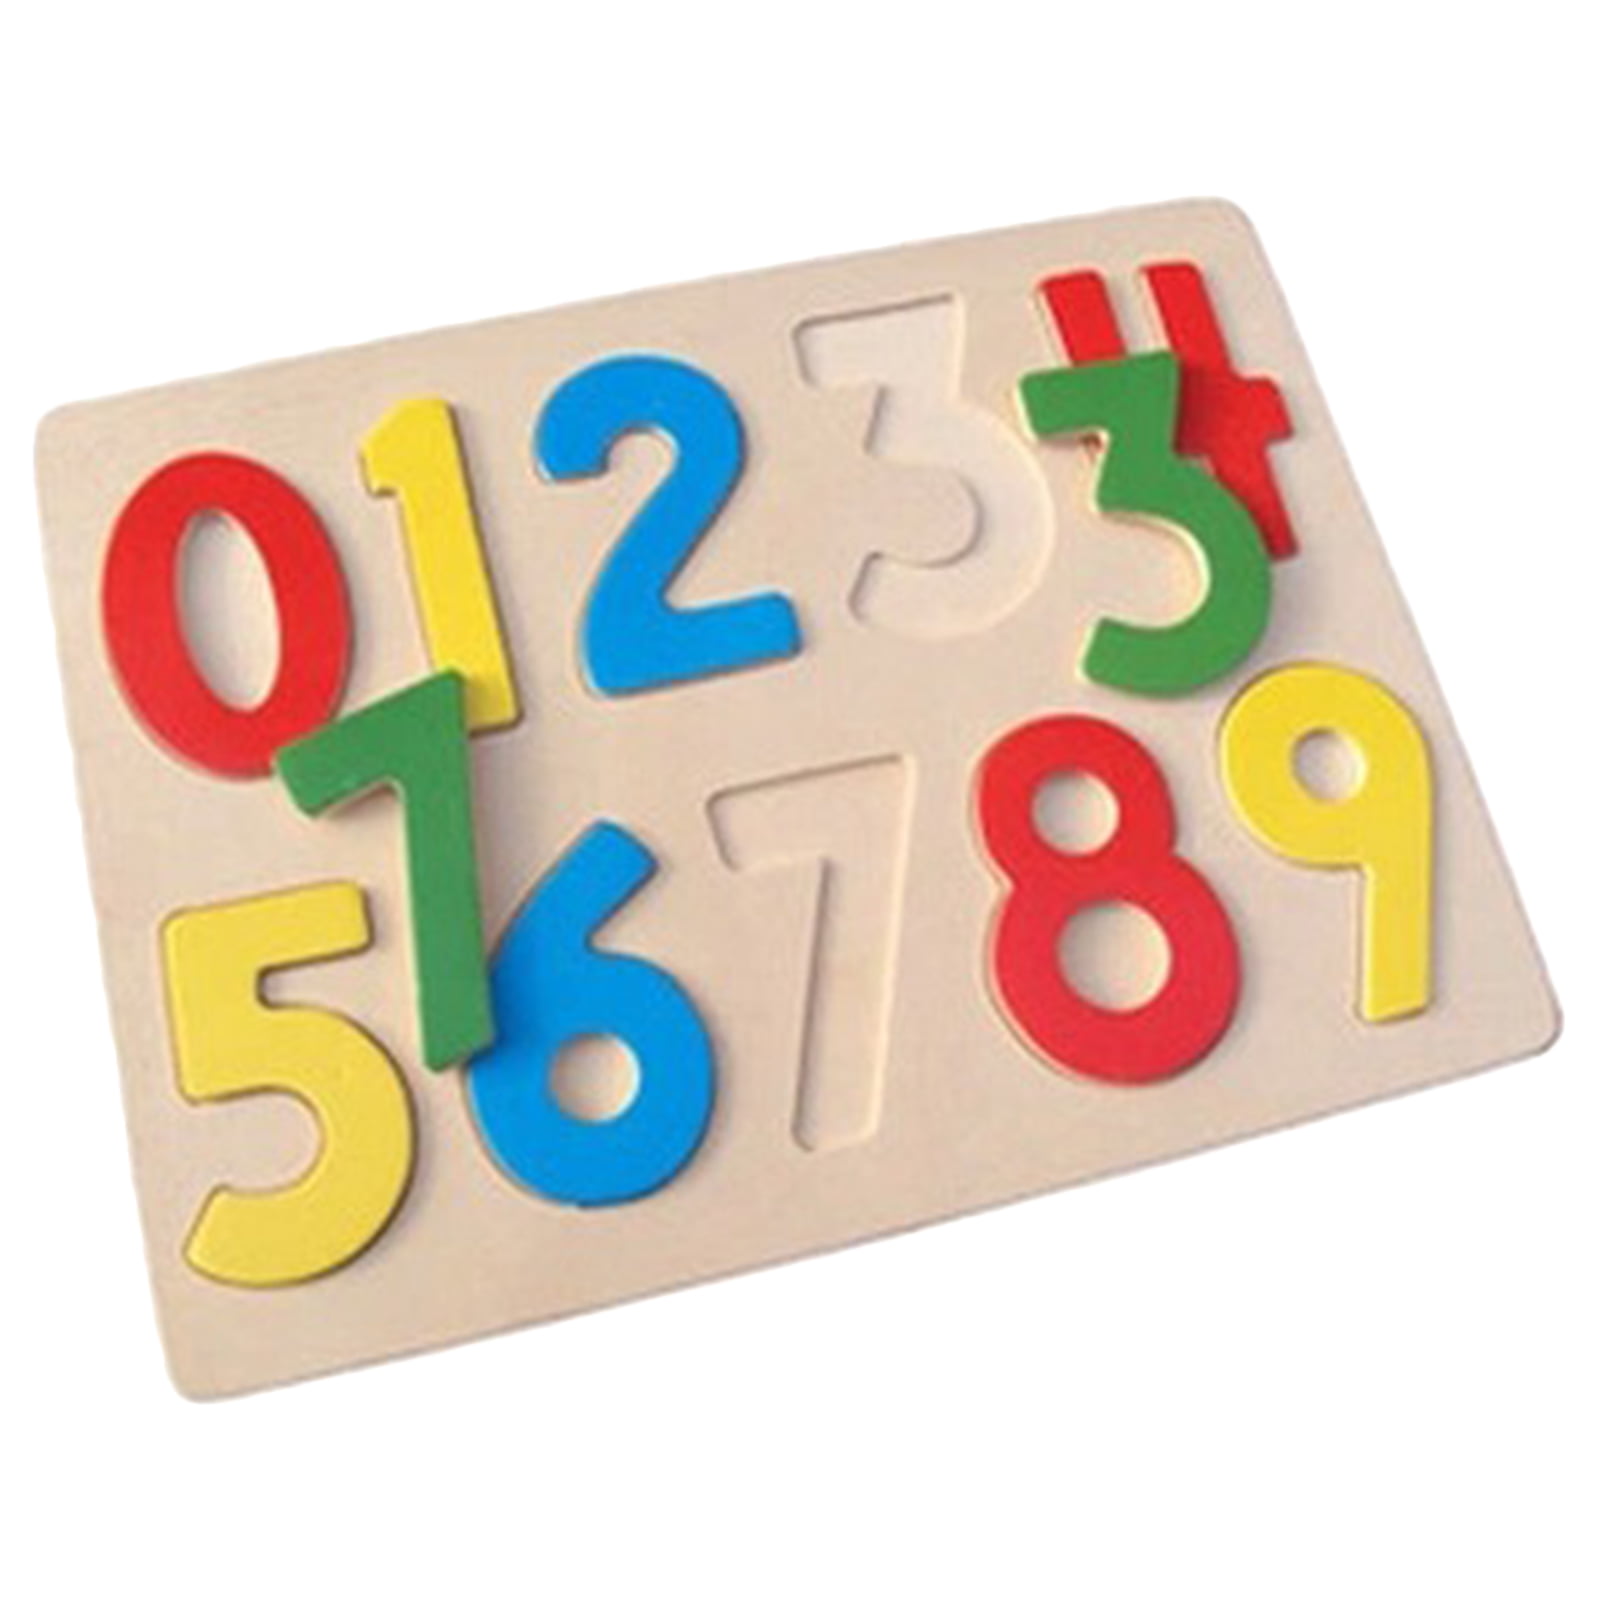 Personalized Wooden Name Puzzle with Numbers and Shapes by Busy Puzzle Personalized Baby Puzzle Math Name Puzzle Montessori Toy Educational Toy Stem Toys Sensory Toys